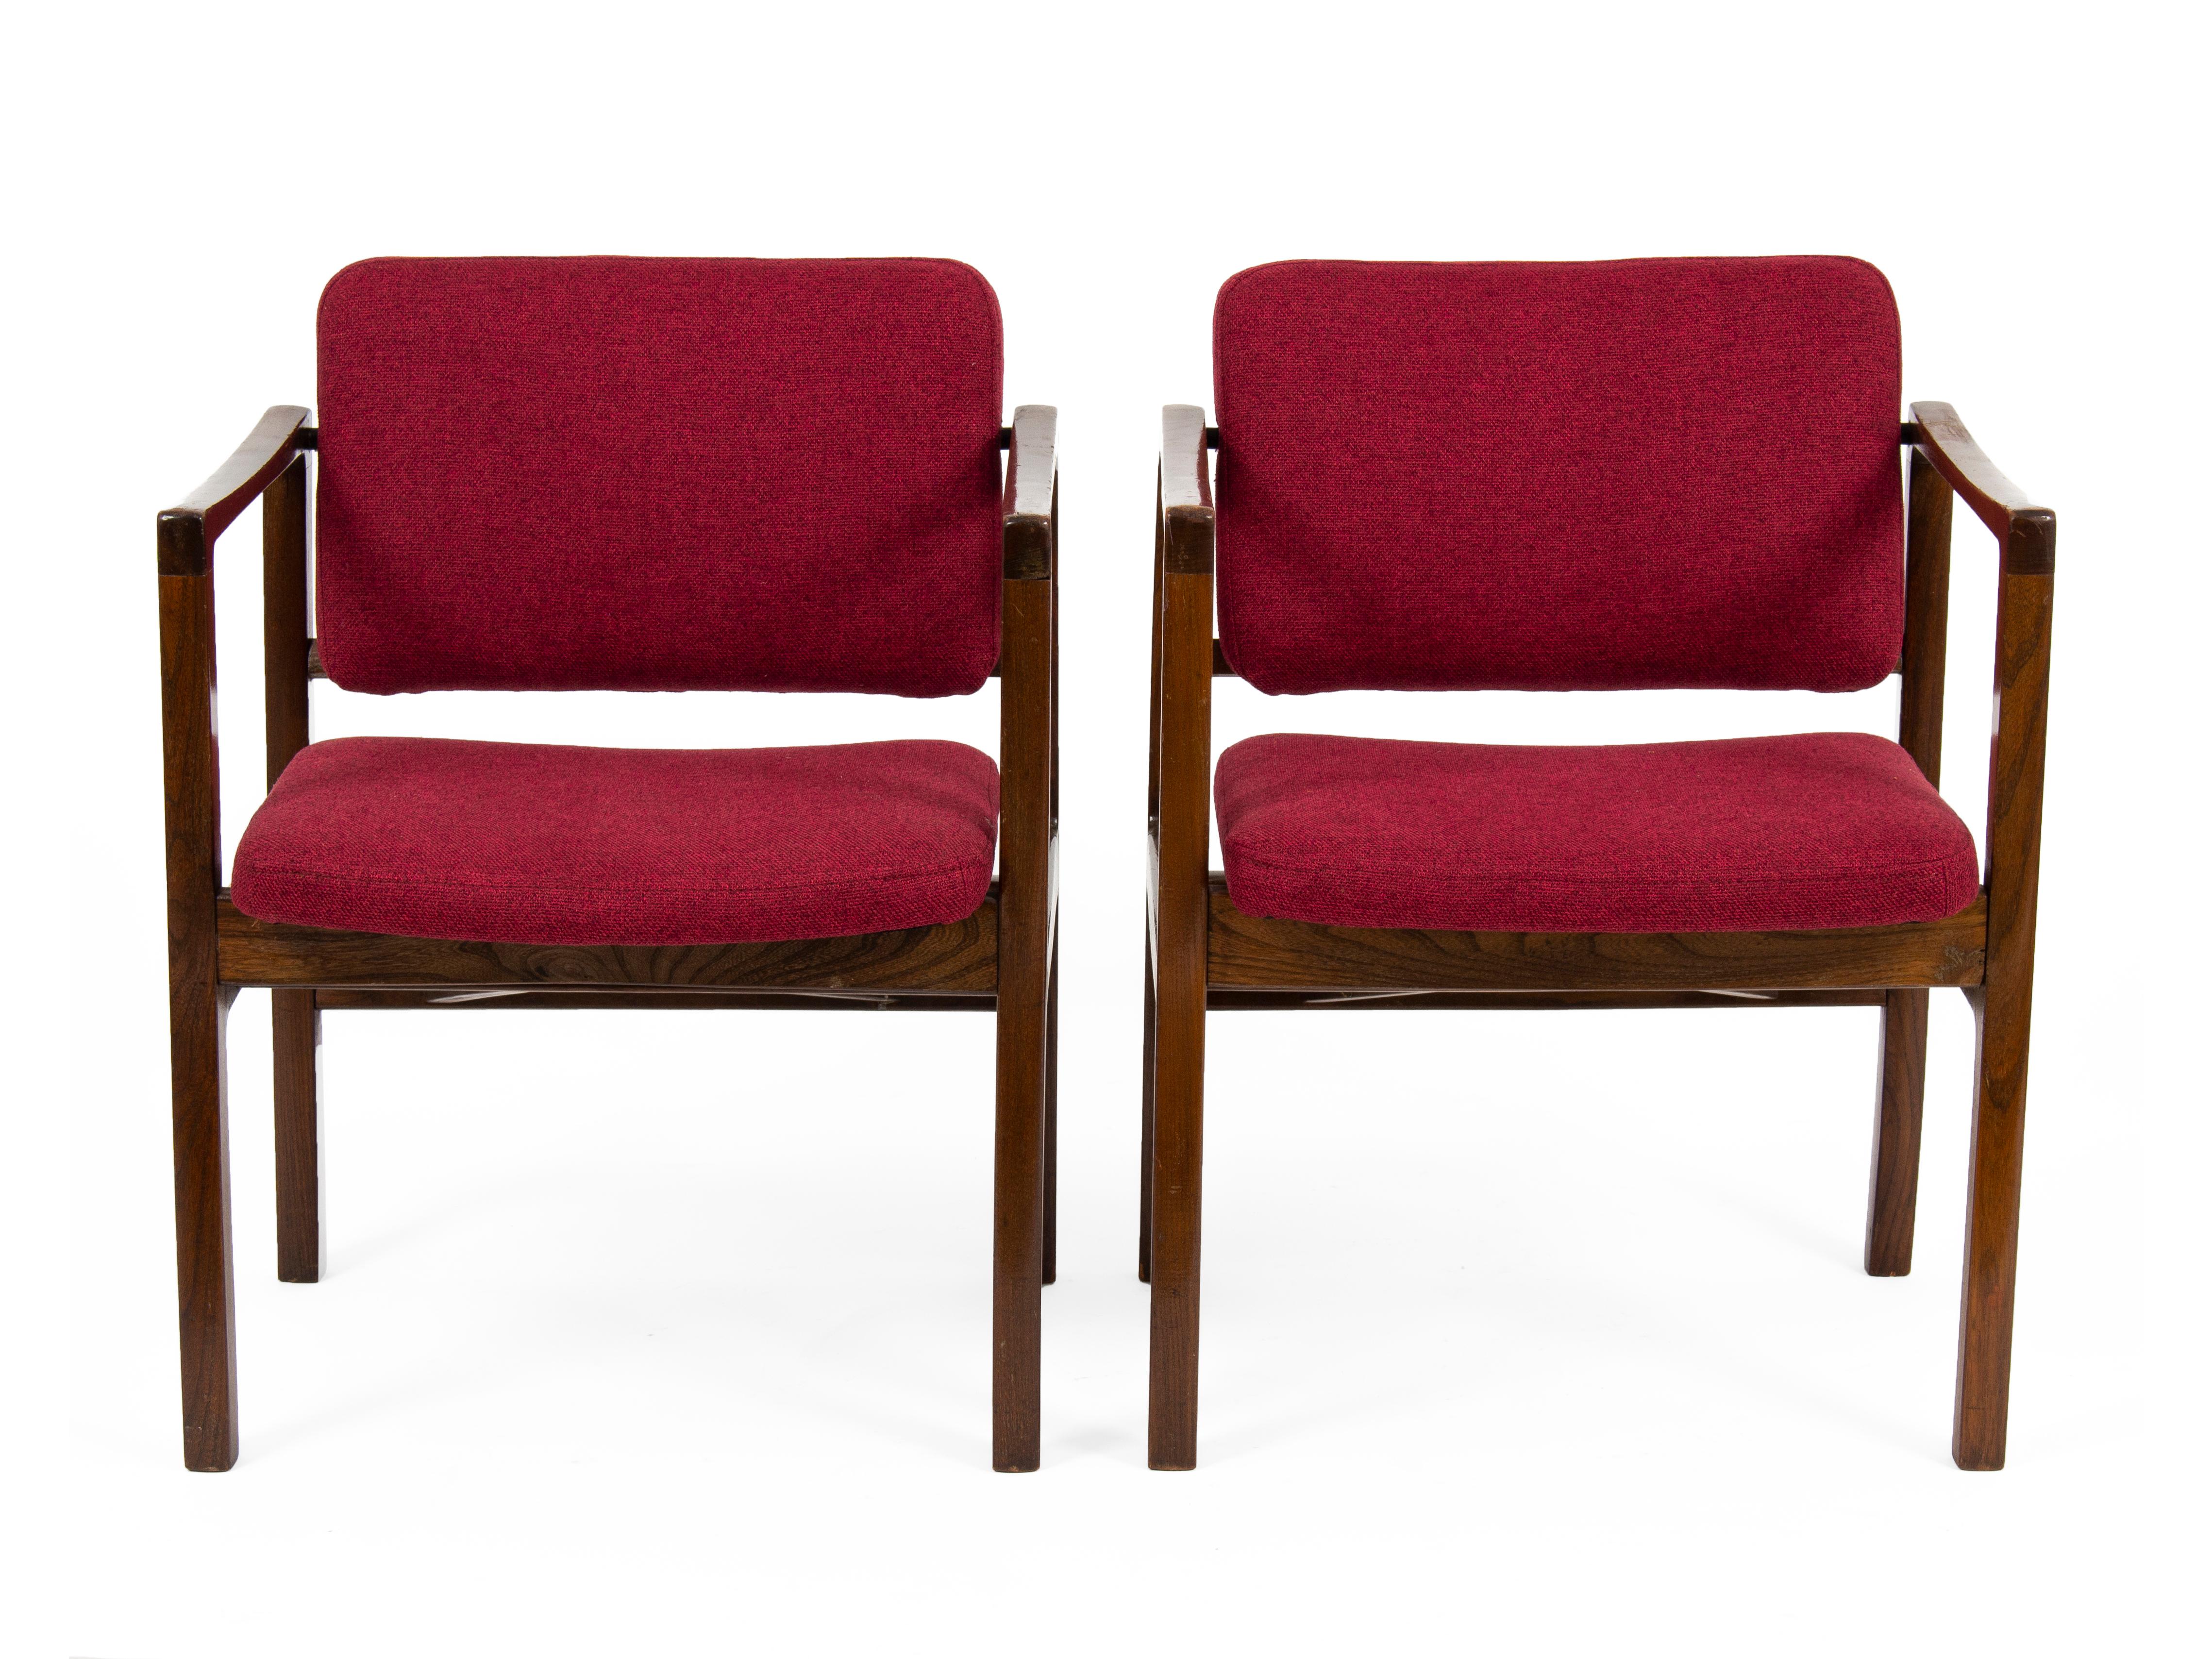 The set of 8 chairs was designed and manufactured in the 1970s in Czechoslovakia. The armchairs are newly reupholsetered.